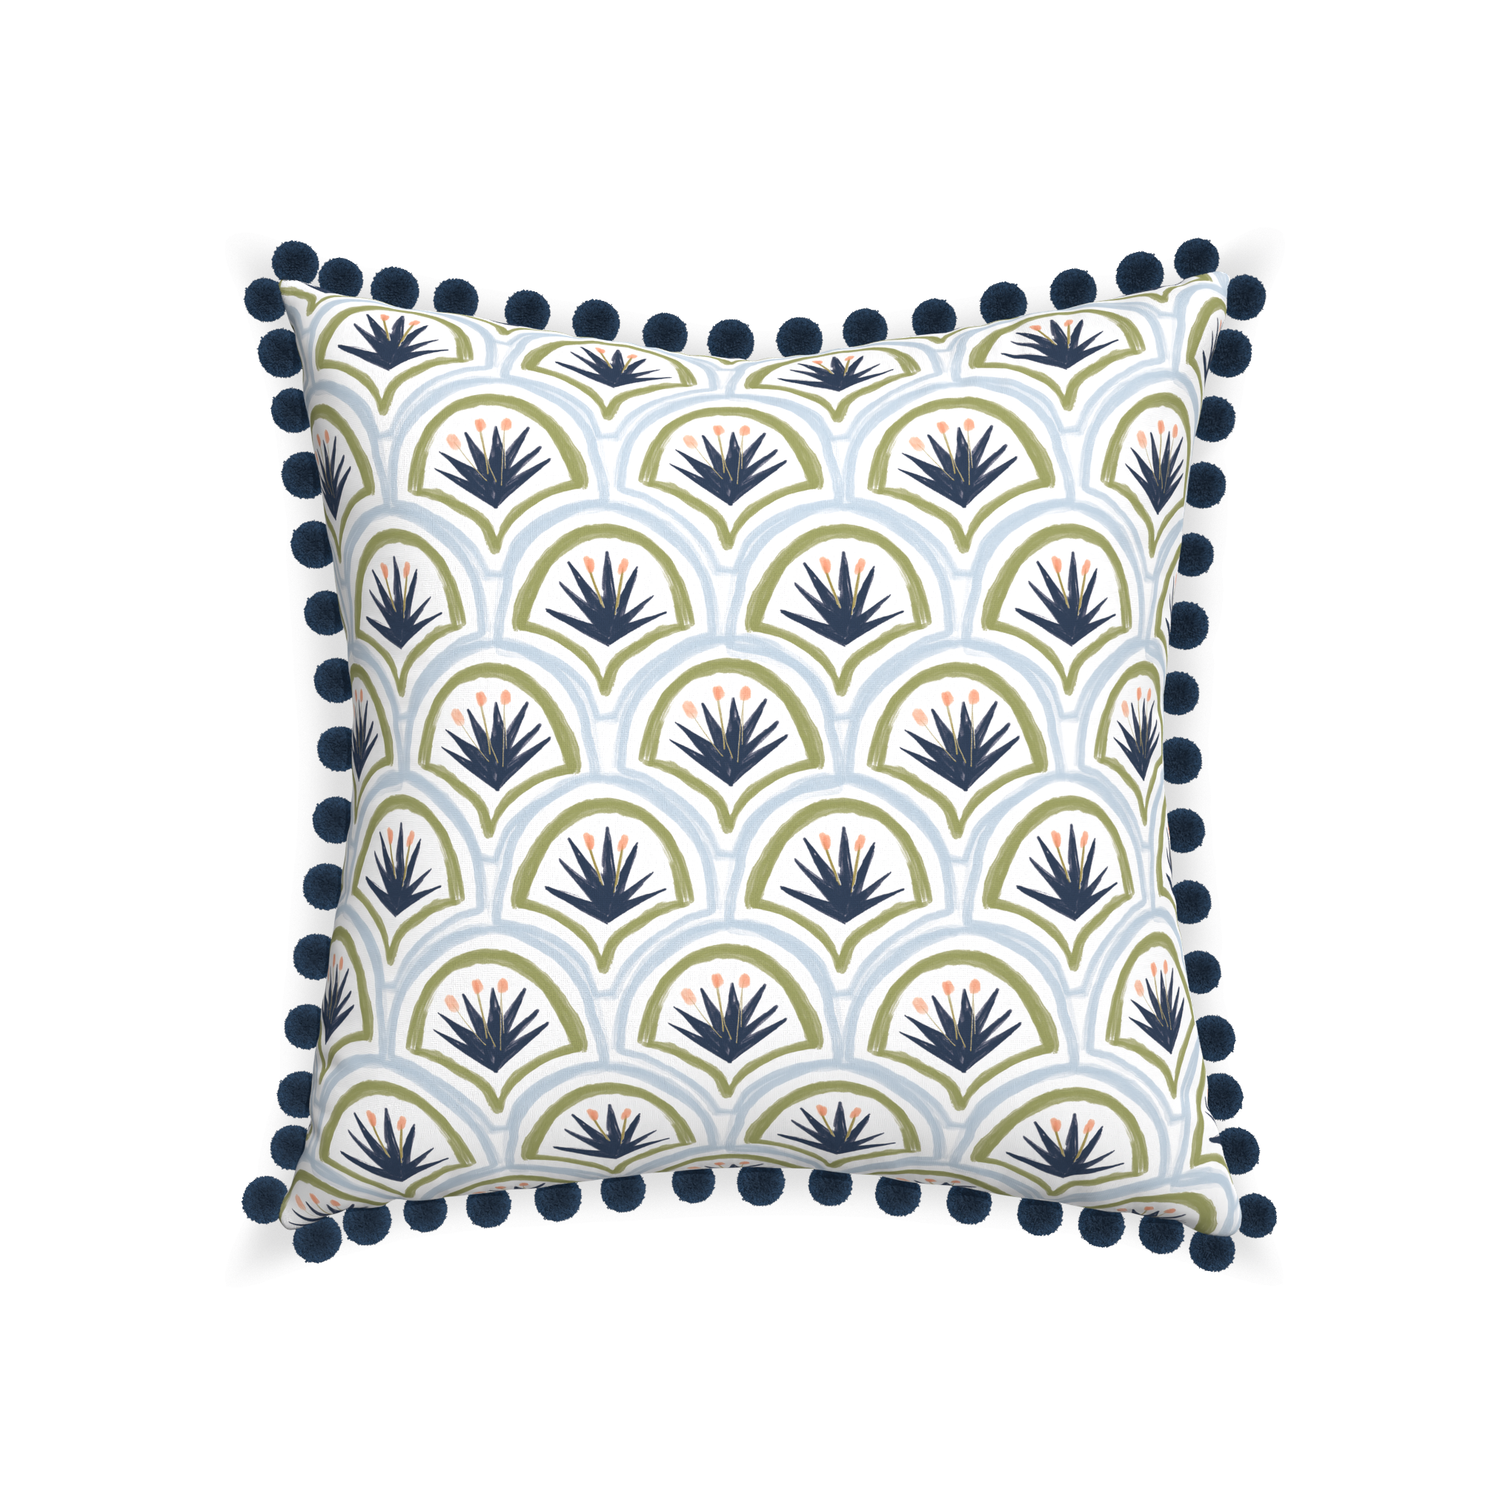 22-square thatcher midnight custom art deco palm patternpillow with c on white background